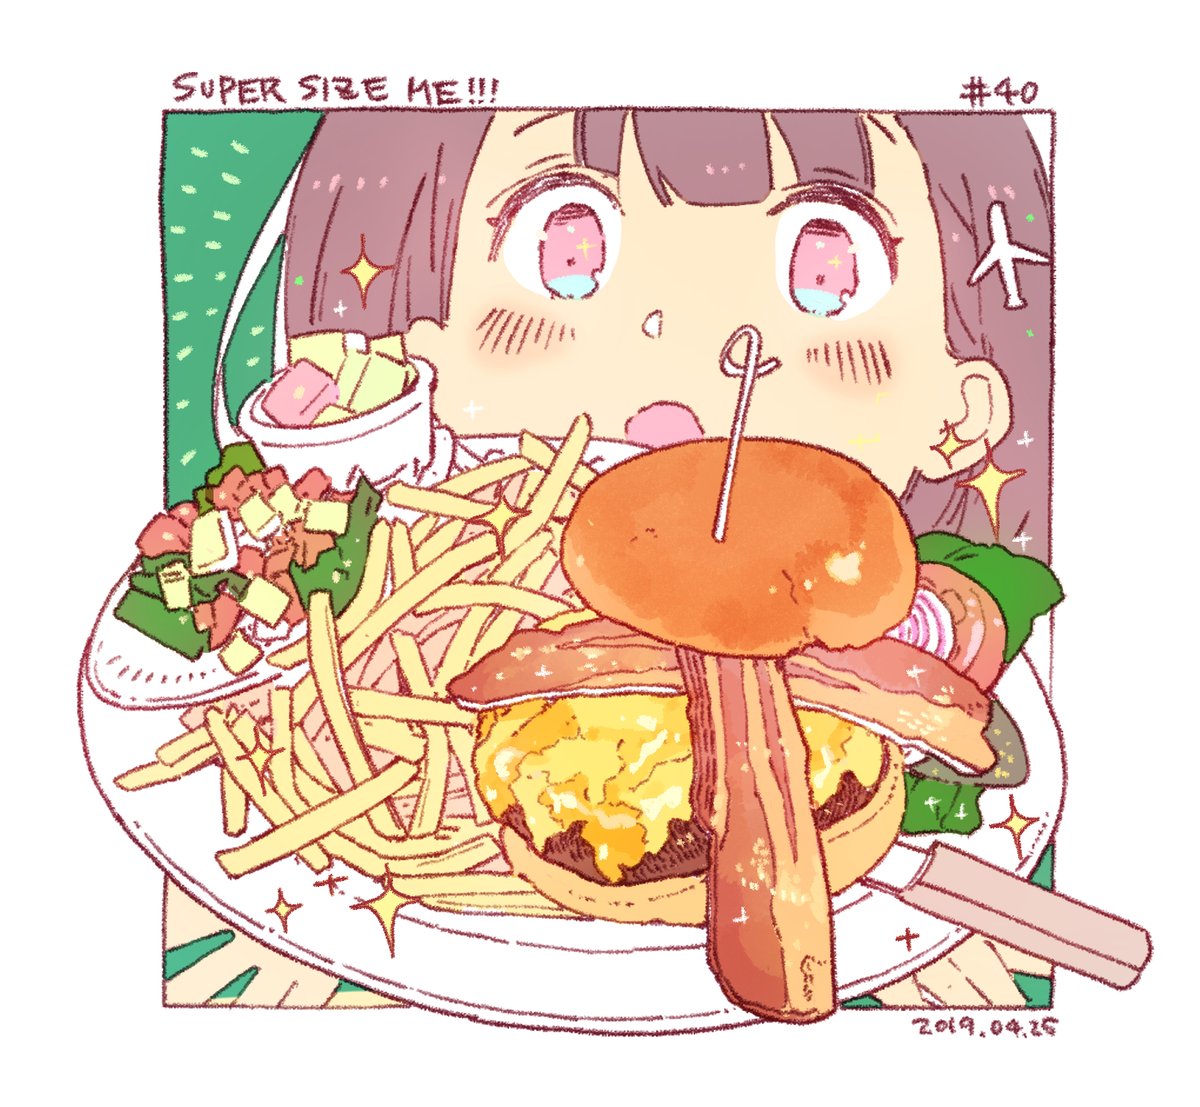 Day39-40. Next, I started traveling to the United States. During the period, honeymoon characters will appear.
American food is really huge!

アフリカ旅から今度はアメリカ旅が始まります。
アメリカ飯でっかい! 